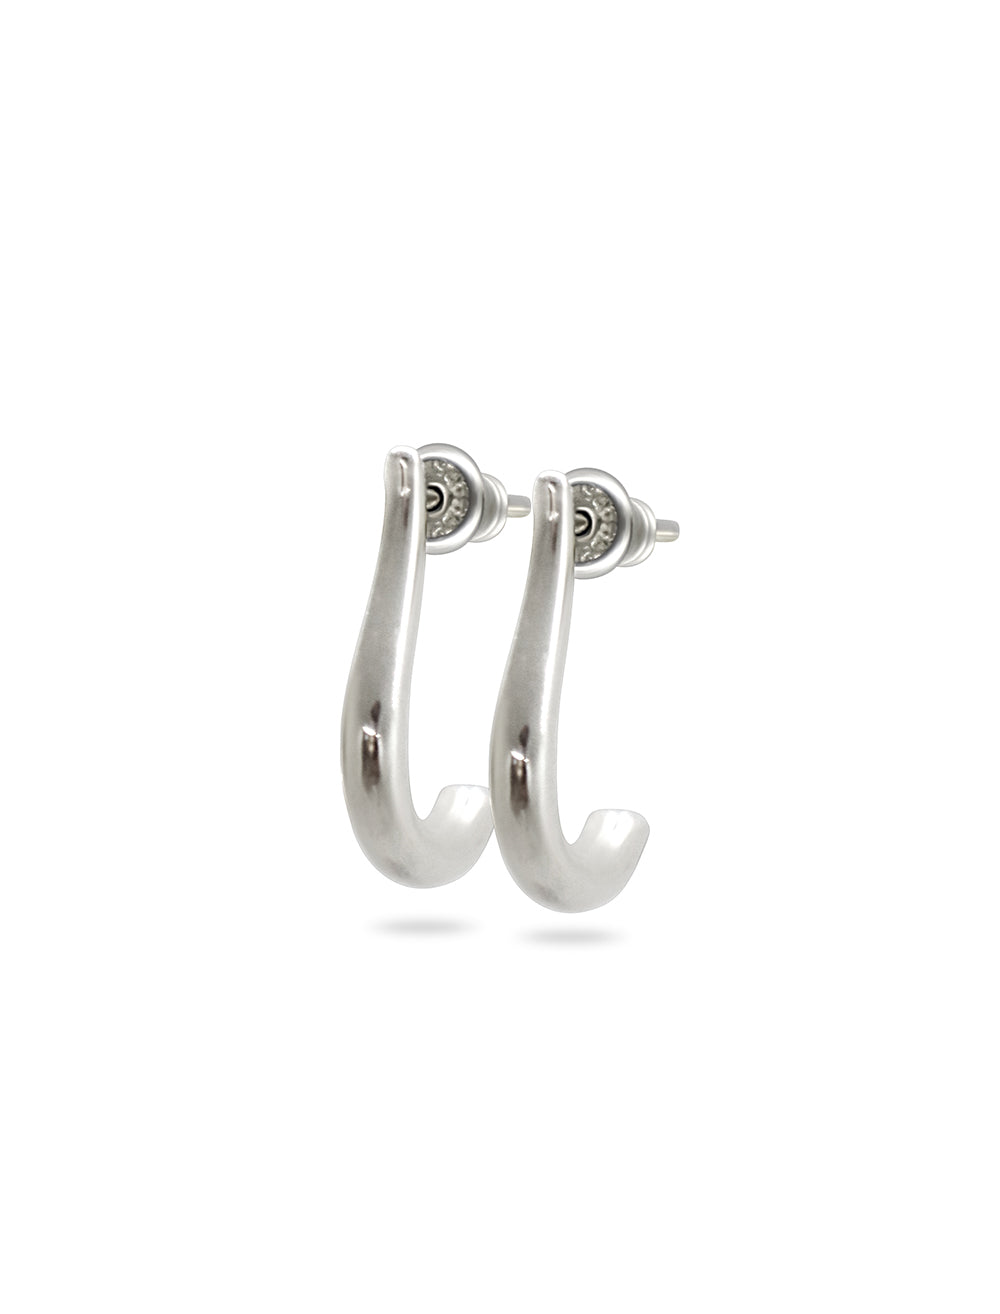 Moghes-Hook-Earrings made of silver